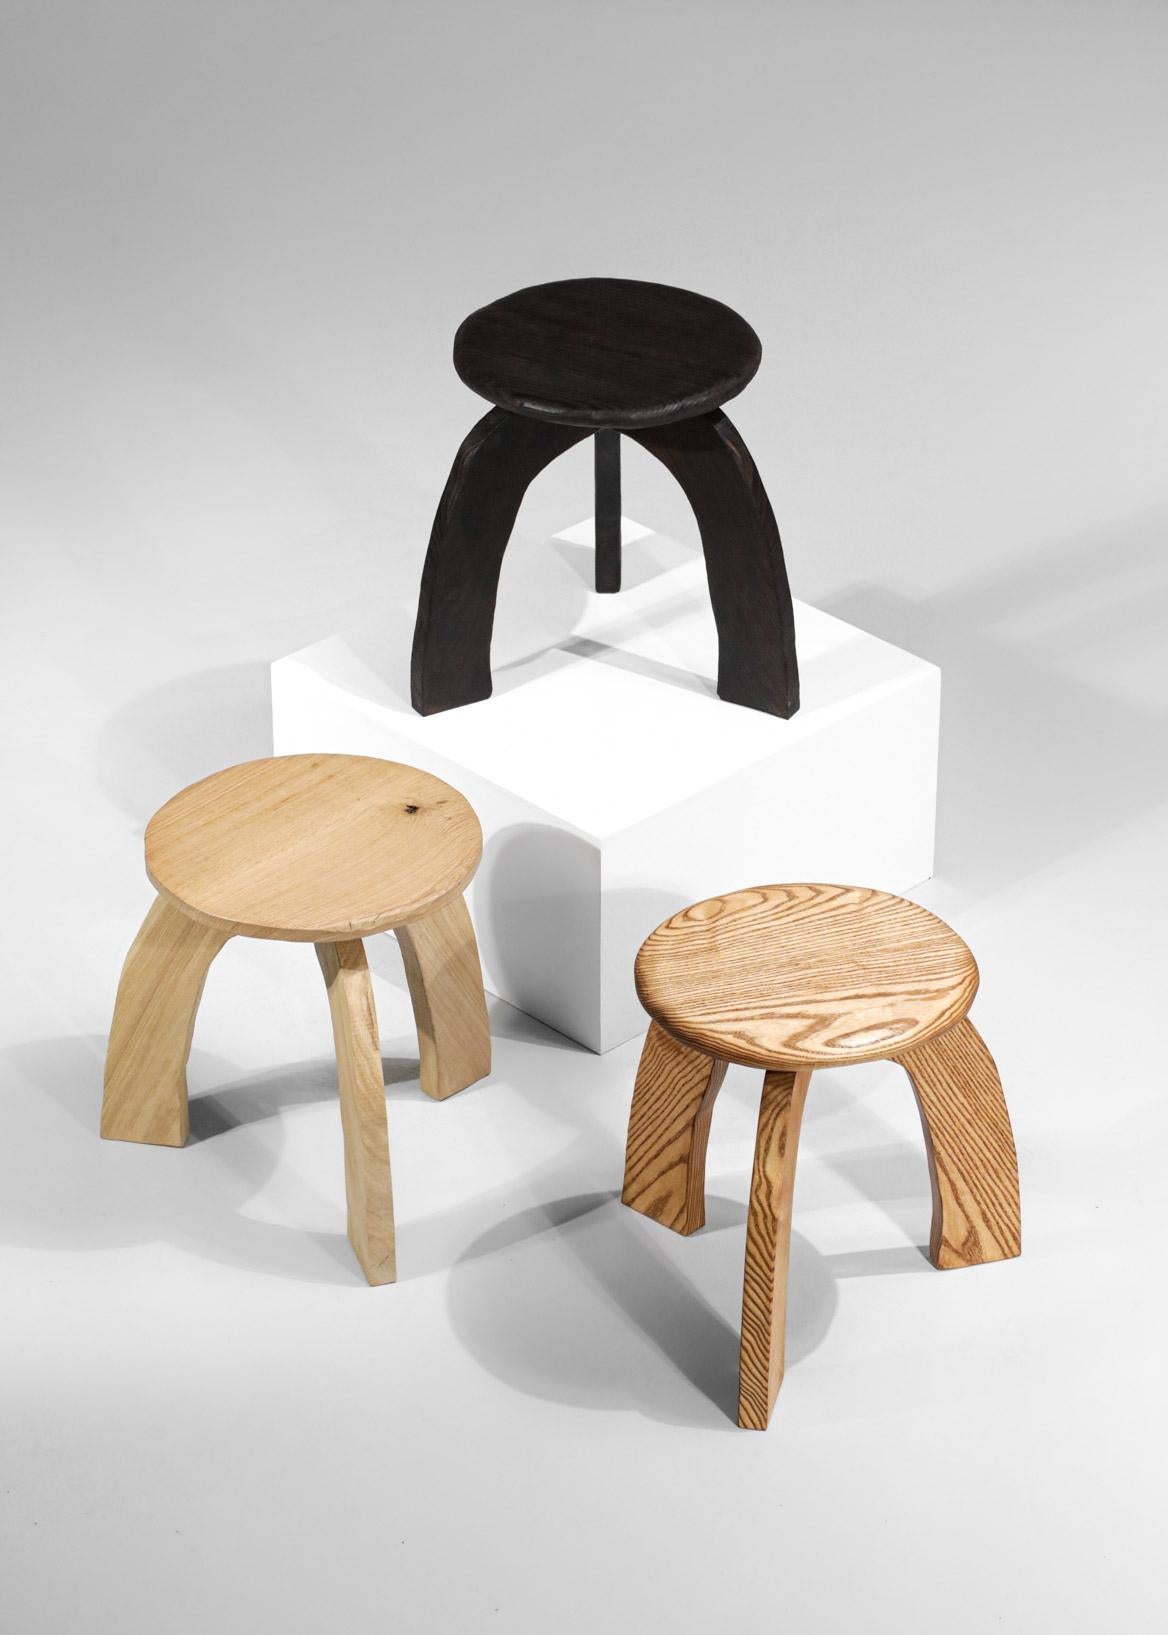 Danke galerie presents the latest creation of the cabinetmaker Vincent Vincent. This Ethnic inspired stool in solid ash wood will bring a unique touch to your interior decoration. Designed with quality, comfort and sturdiness in mind, each piece by